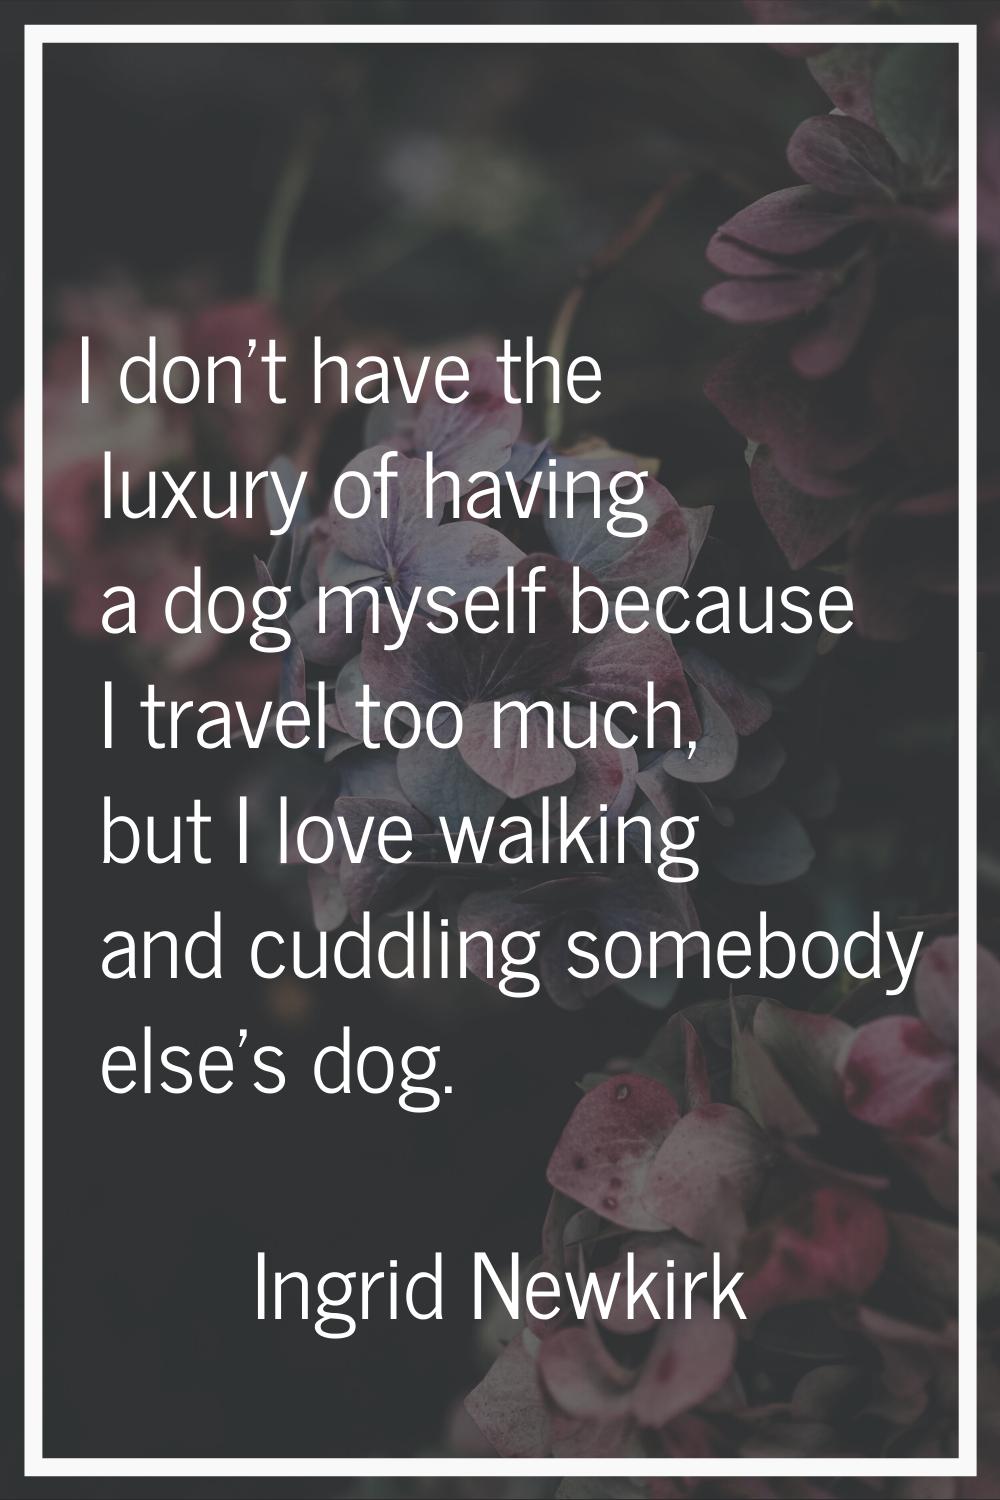 I don't have the luxury of having a dog myself because I travel too much, but I love walking and cu